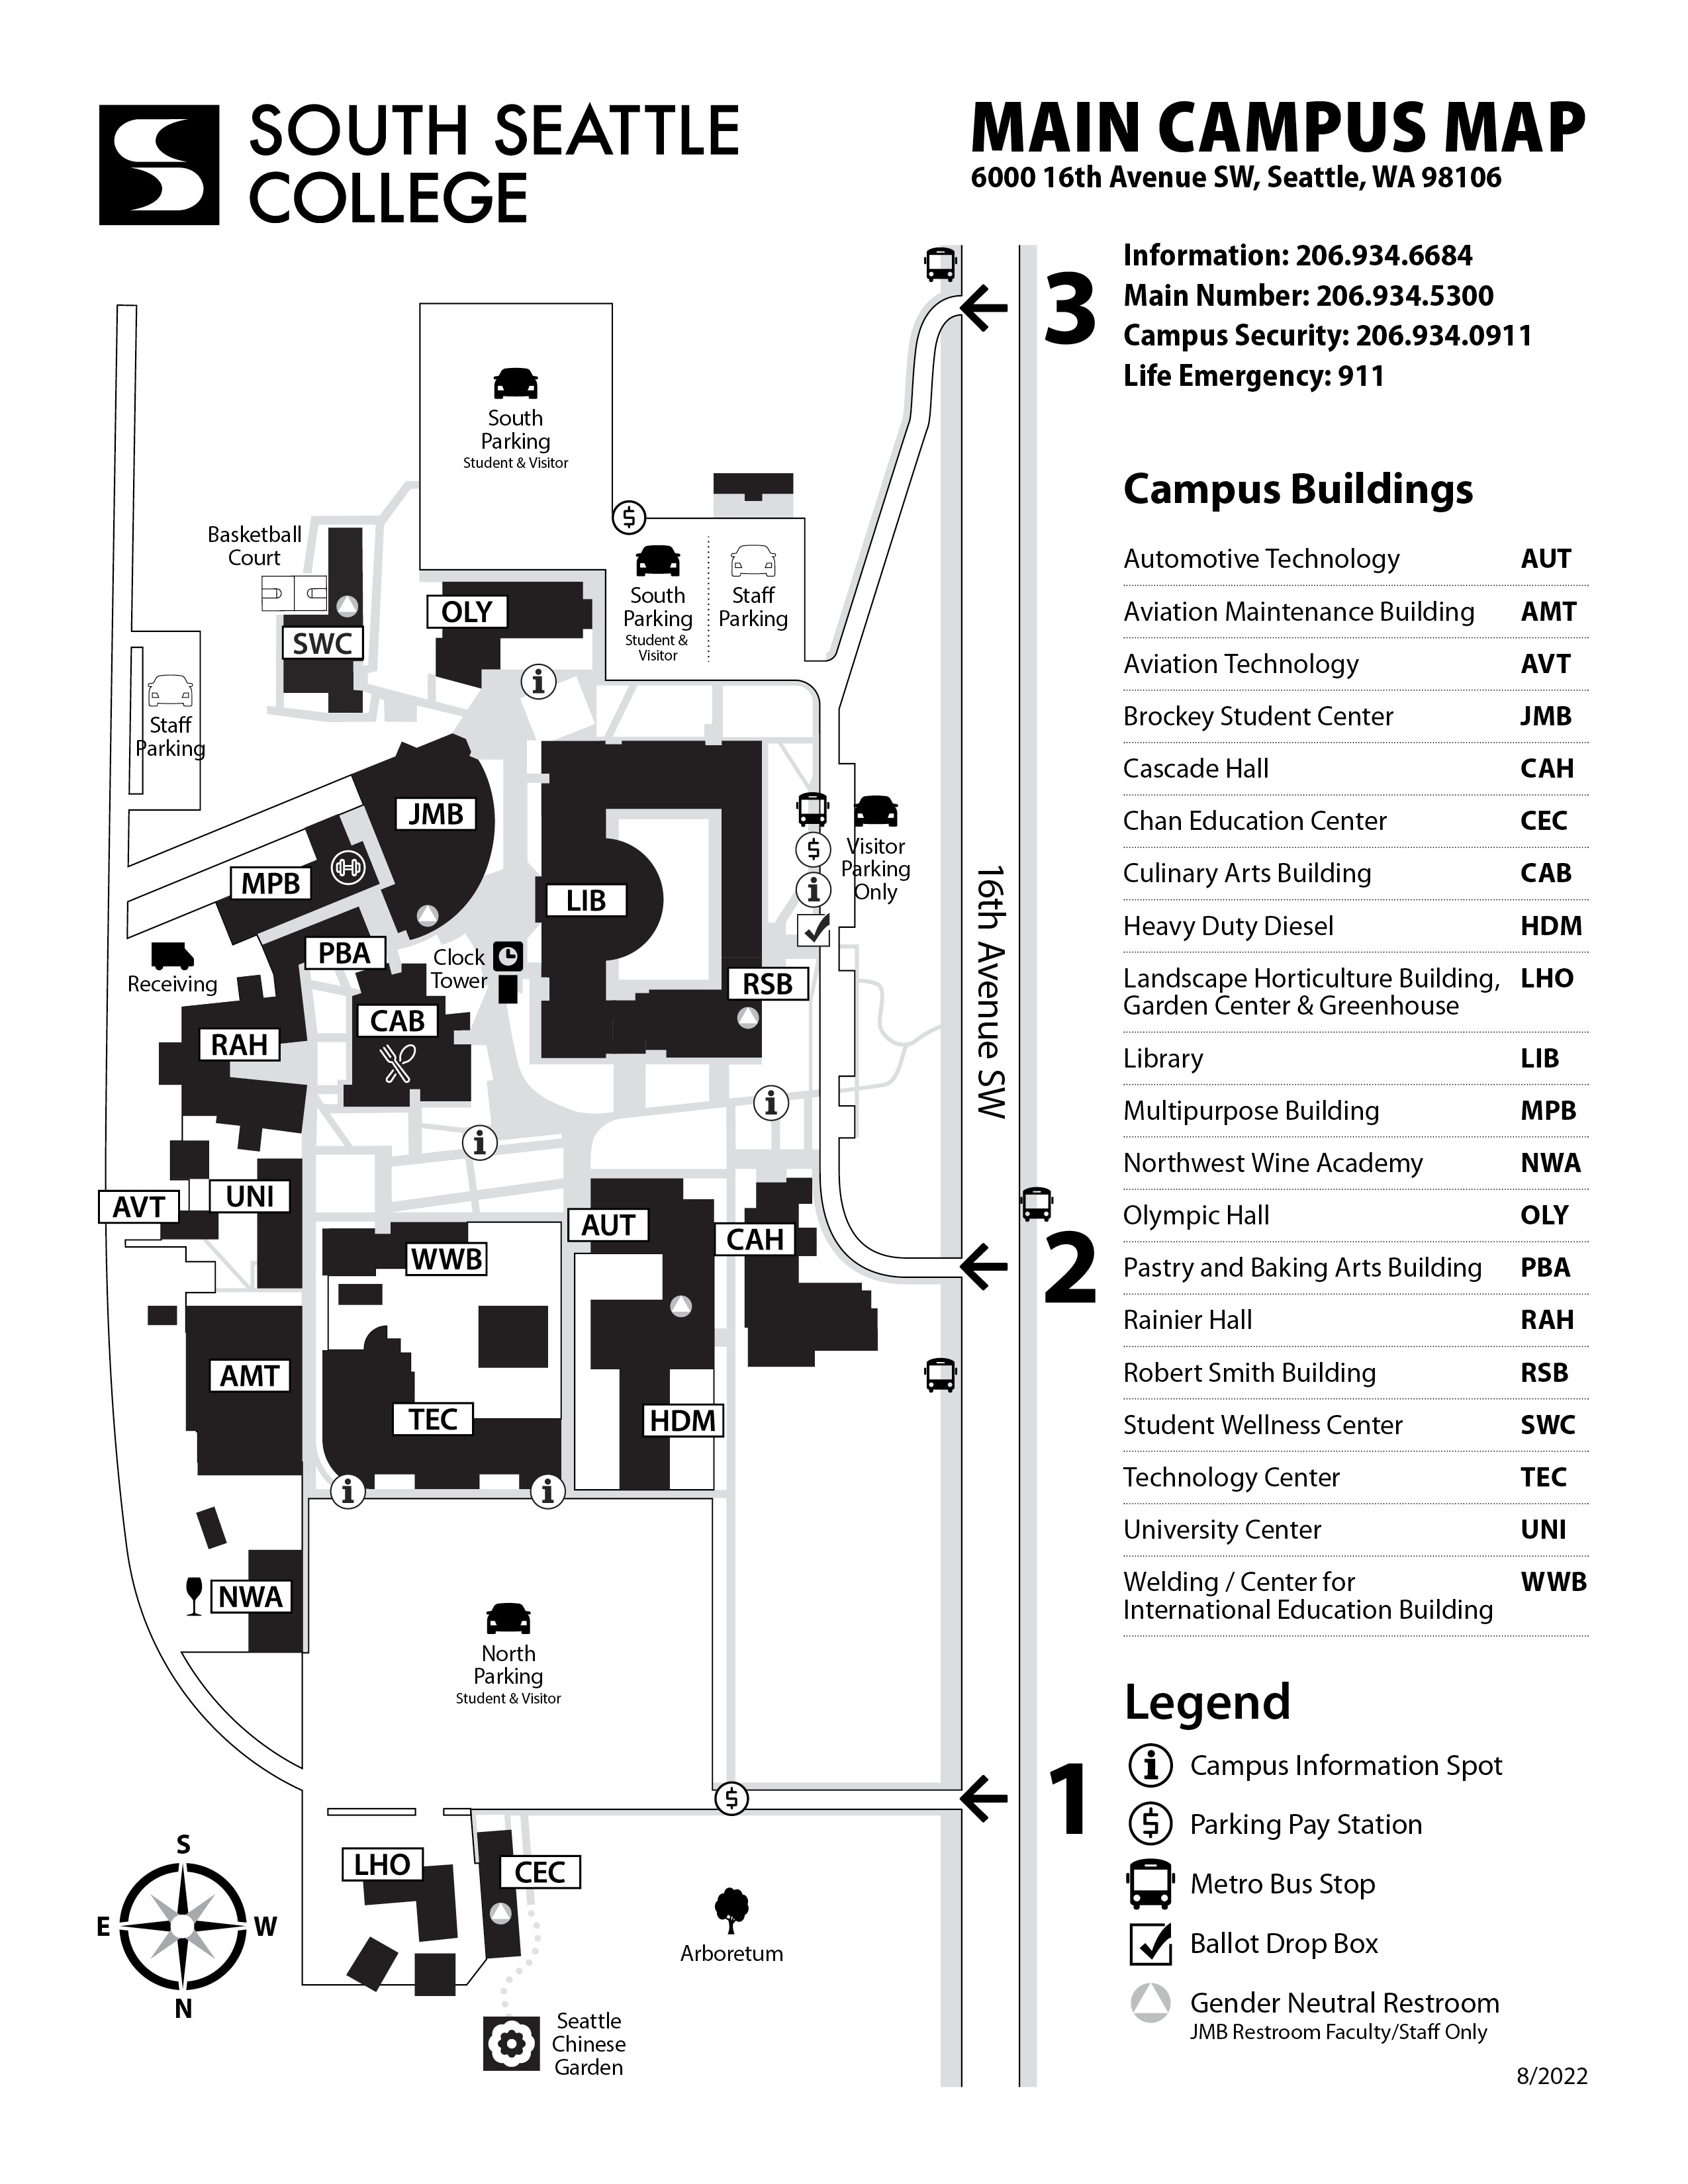 campus-map-south-seattle-college